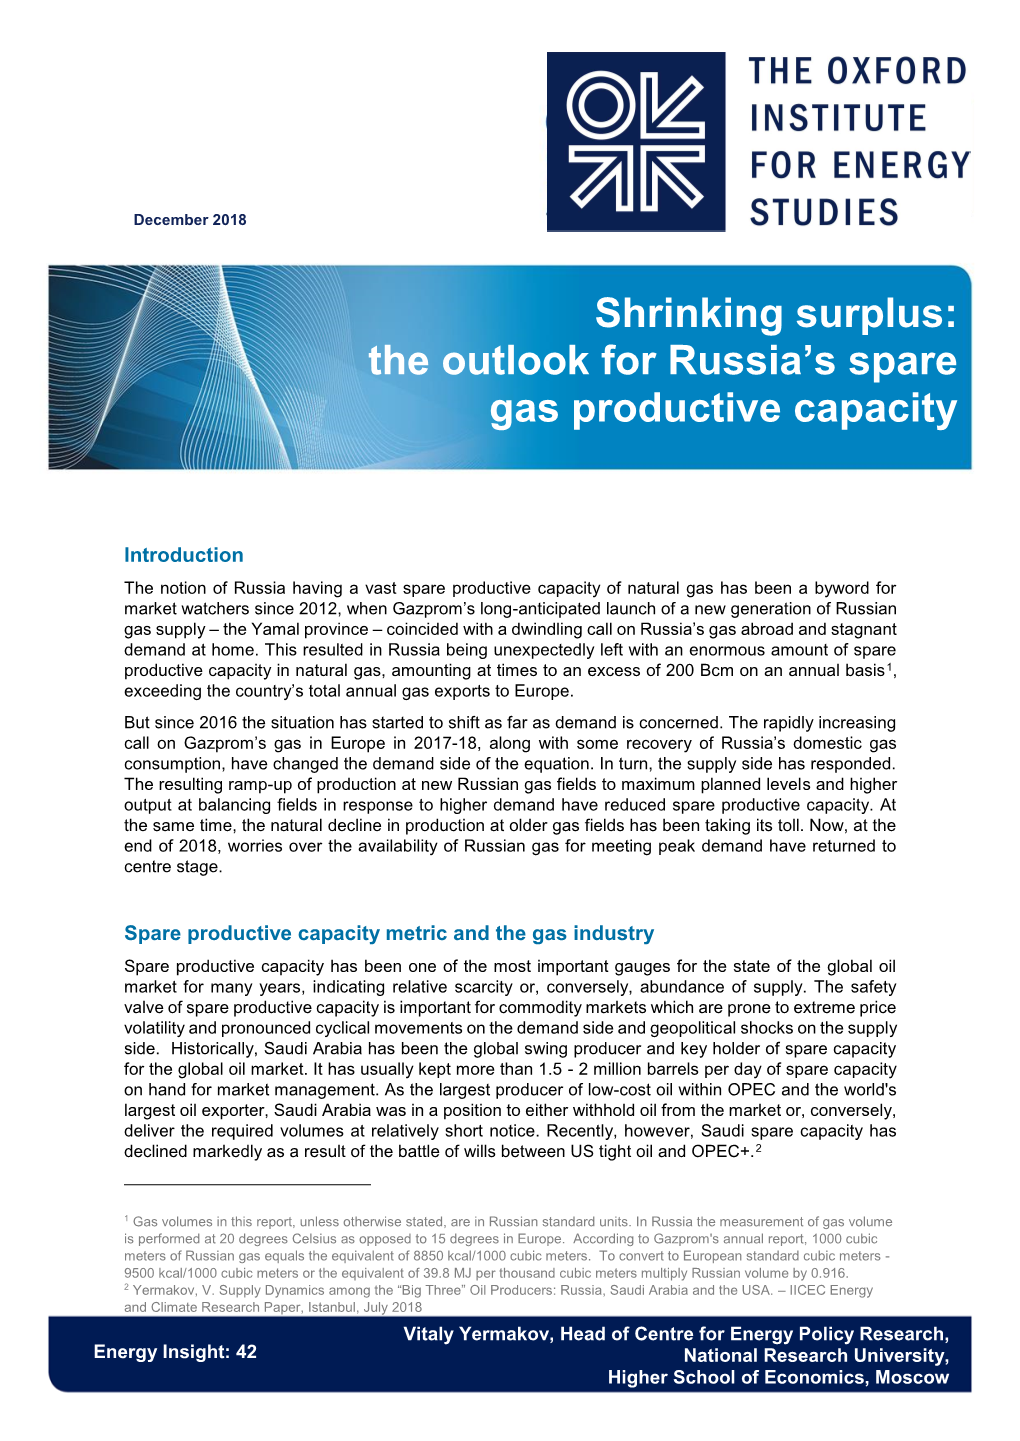 The Outlook for Russia's Spare Gas Productive Capacity